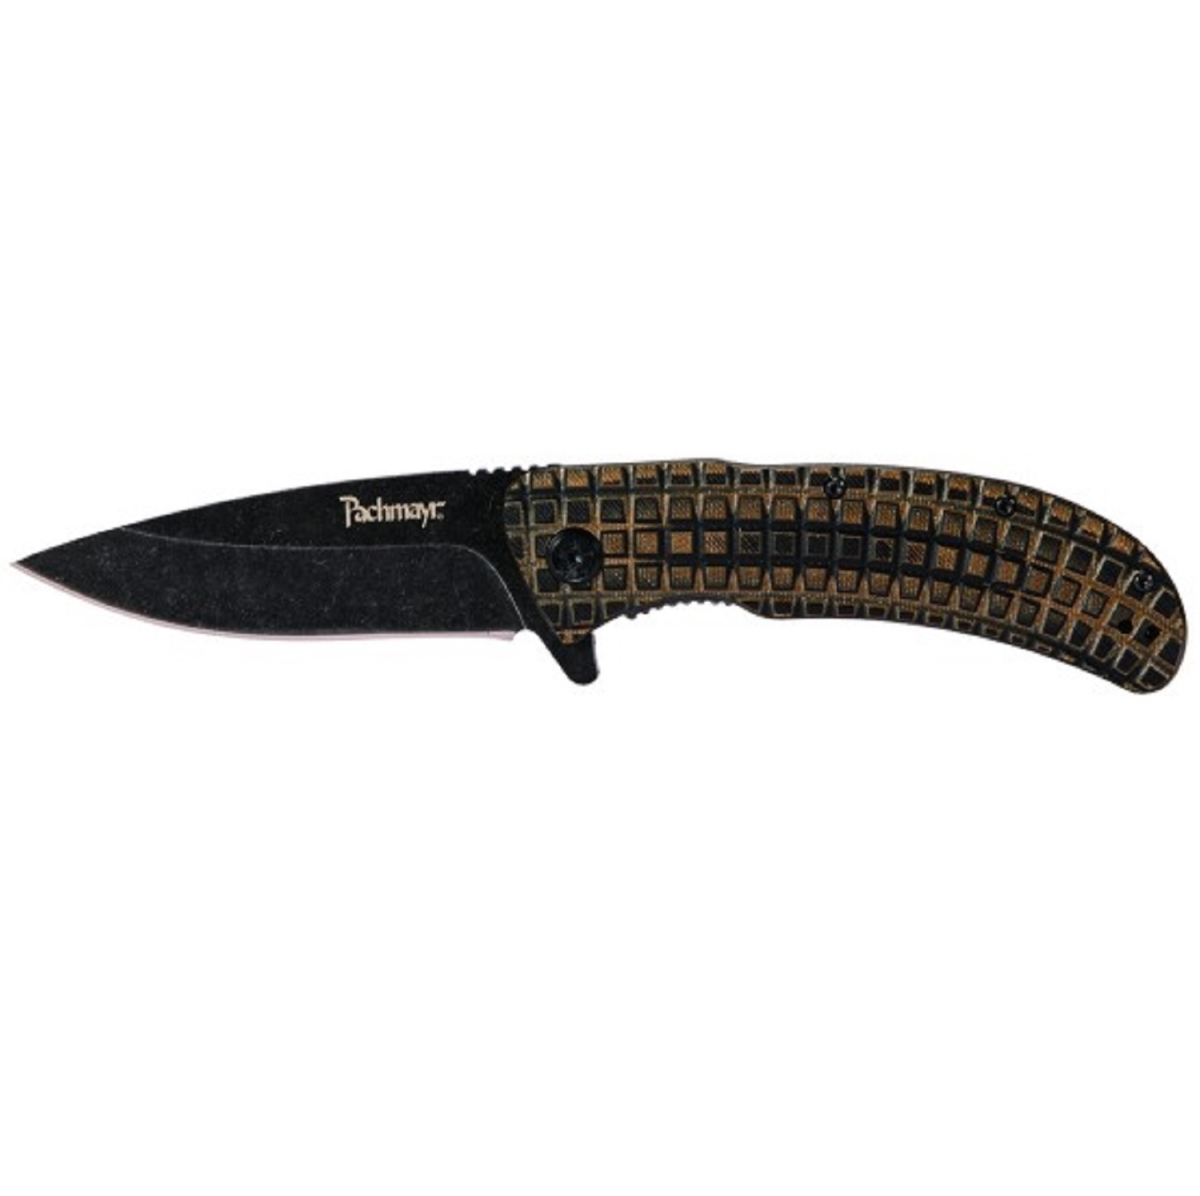 4019396 3.4 In. Grappler Folder Bw Knife Blade With G-10 Handle, Brown